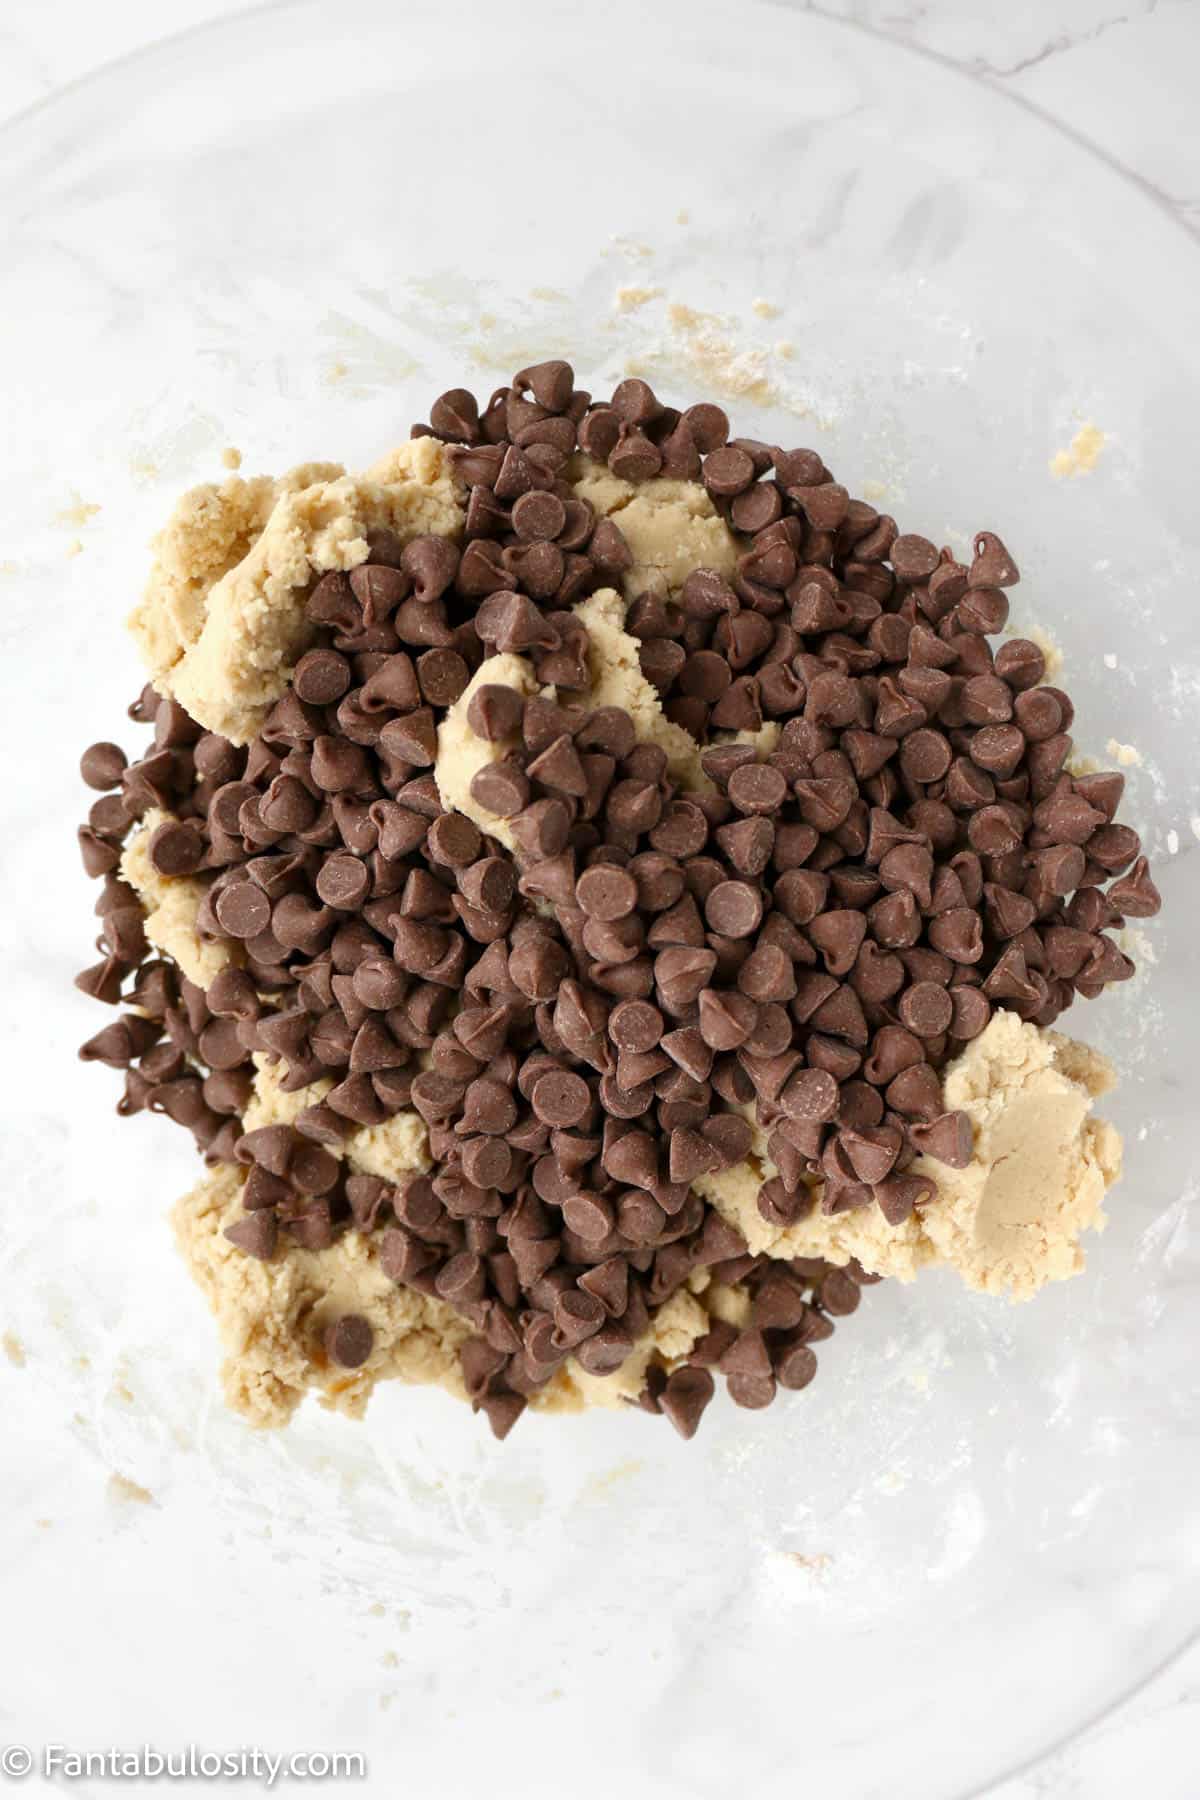 Stir in your chocolate chips.